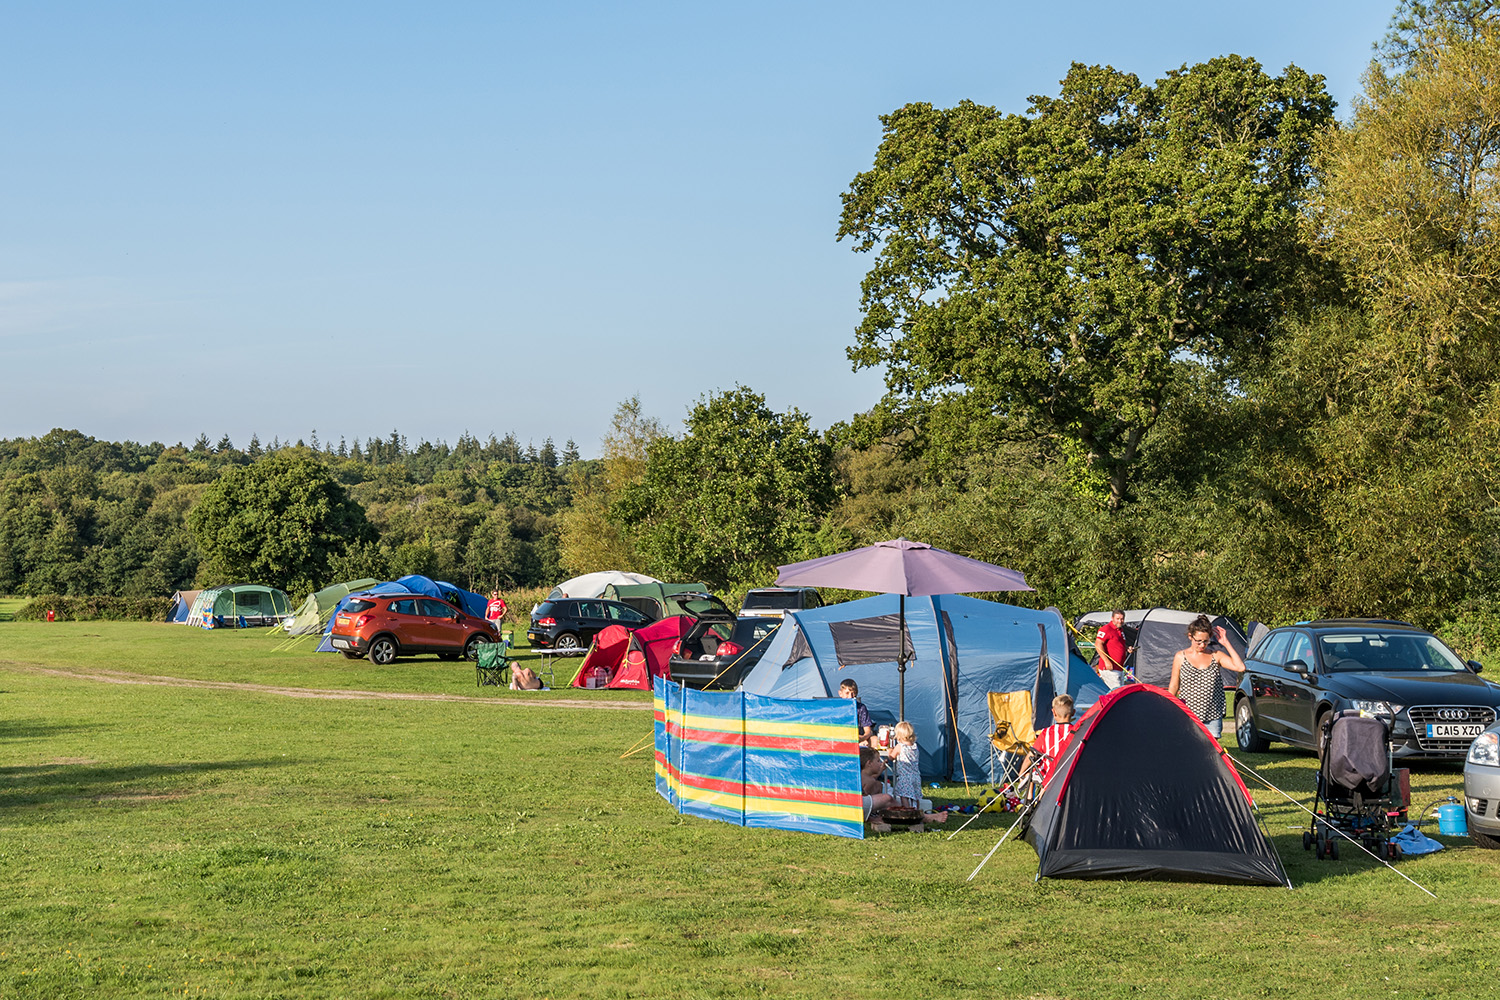 Camping Holidays in Dorset